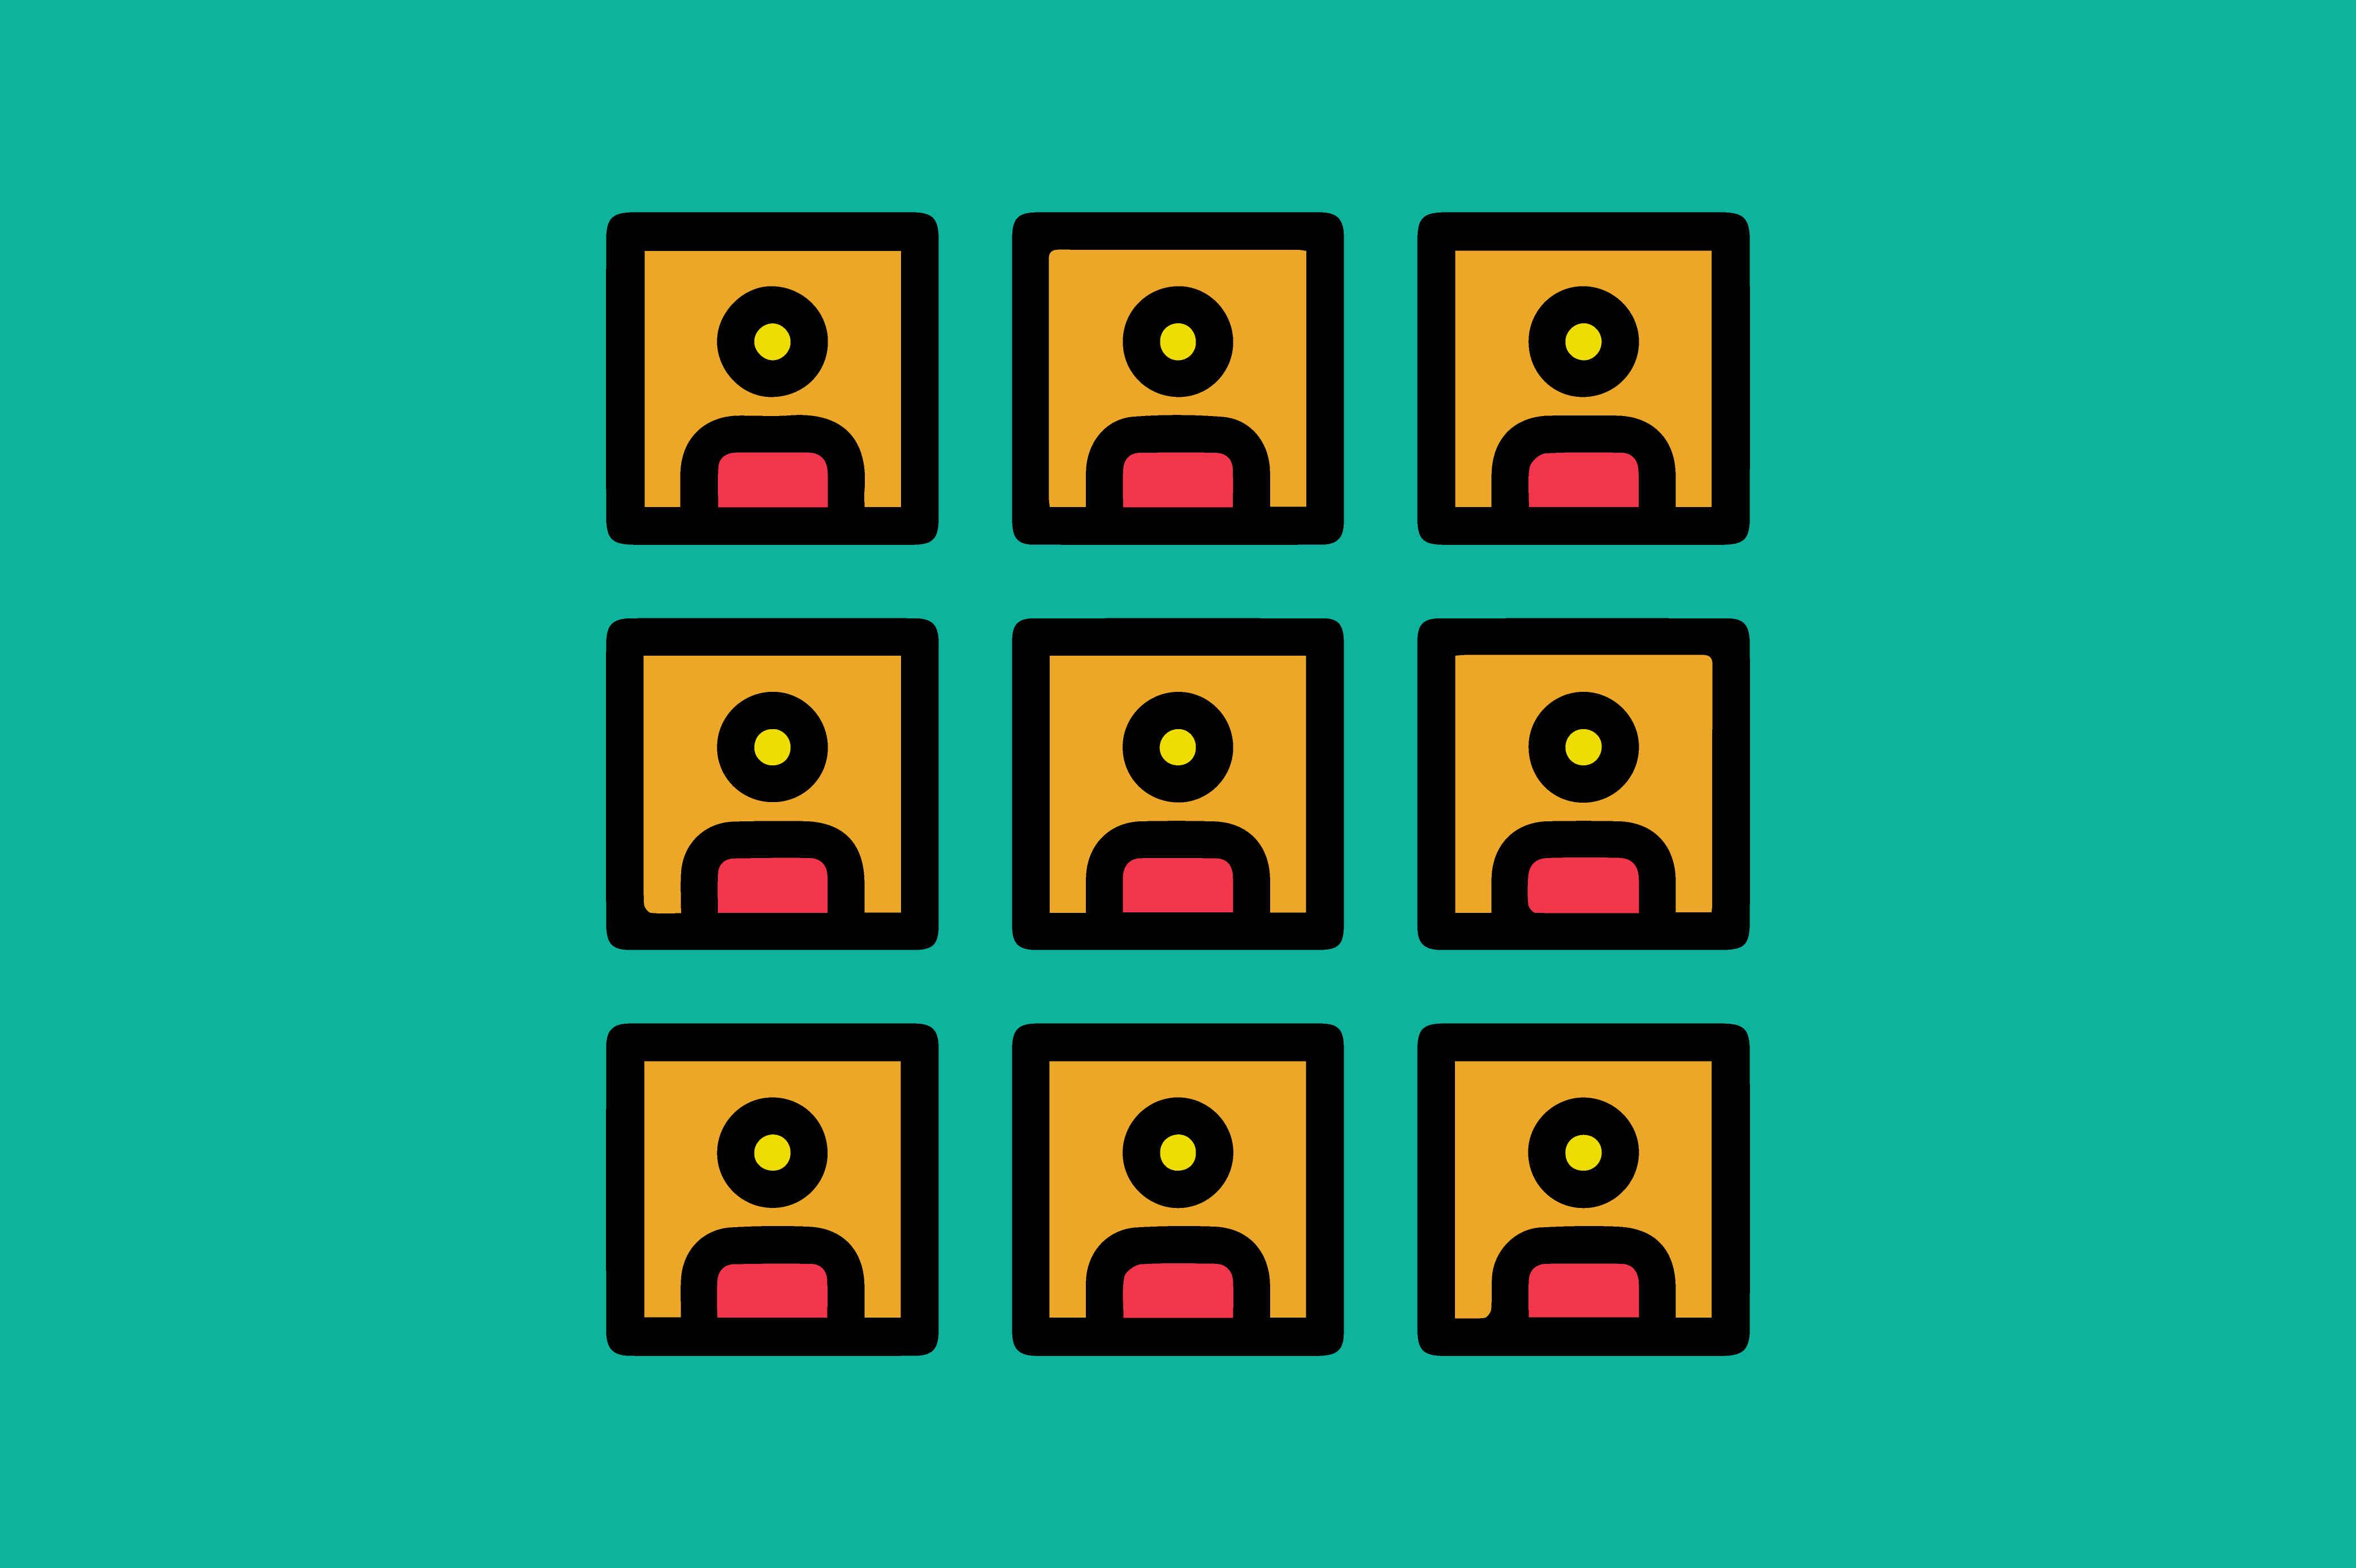 three rows of simple avatars to symbolize many candidates